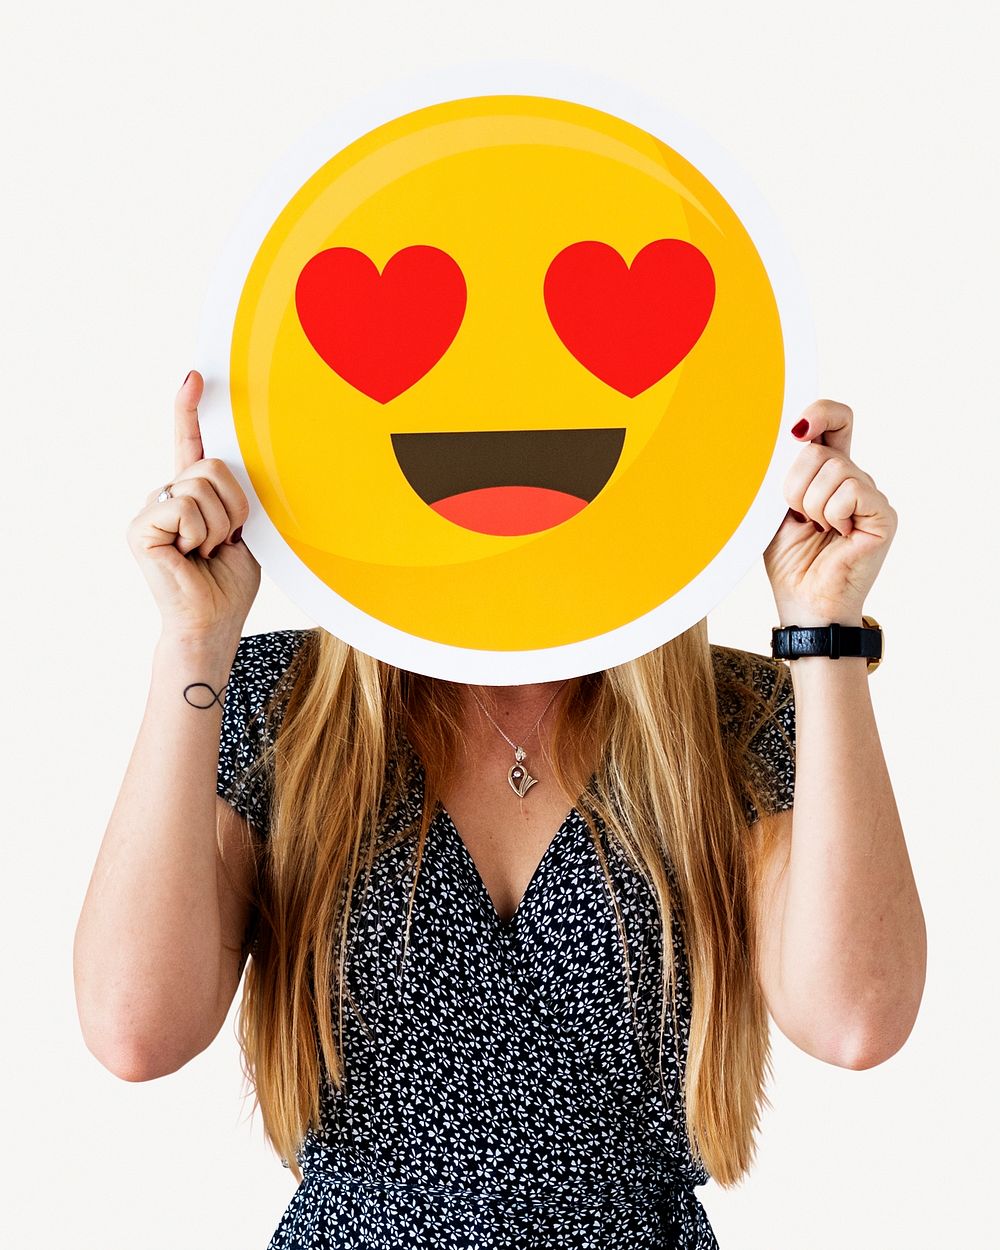 Woman holding cheerful emoticon, people image psd